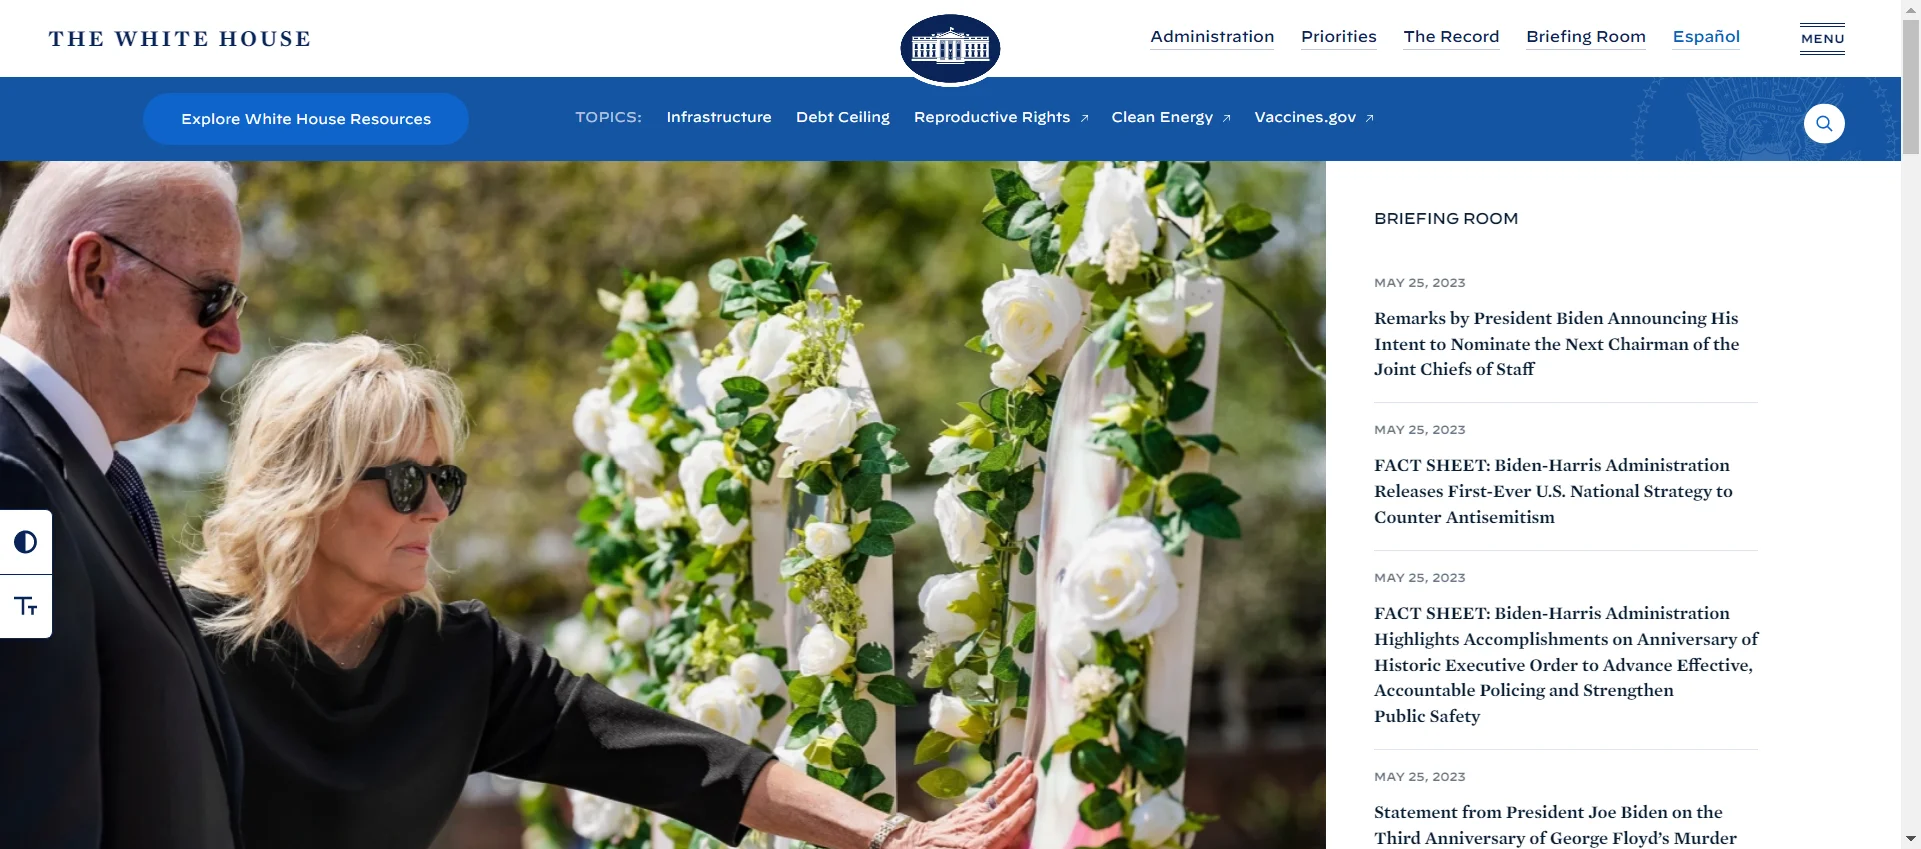 the White House website image